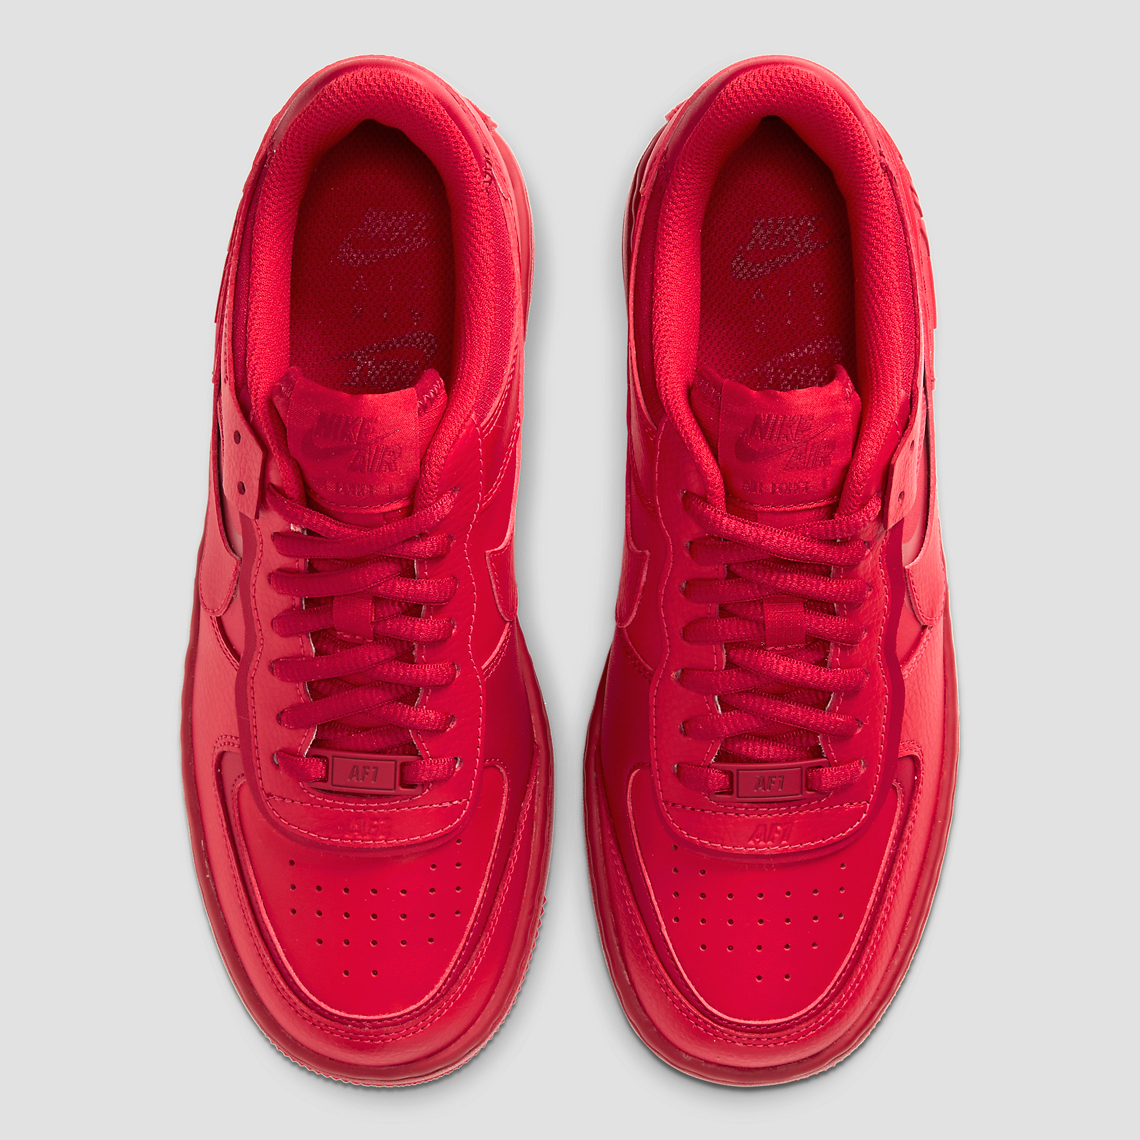 nike air force one triple red